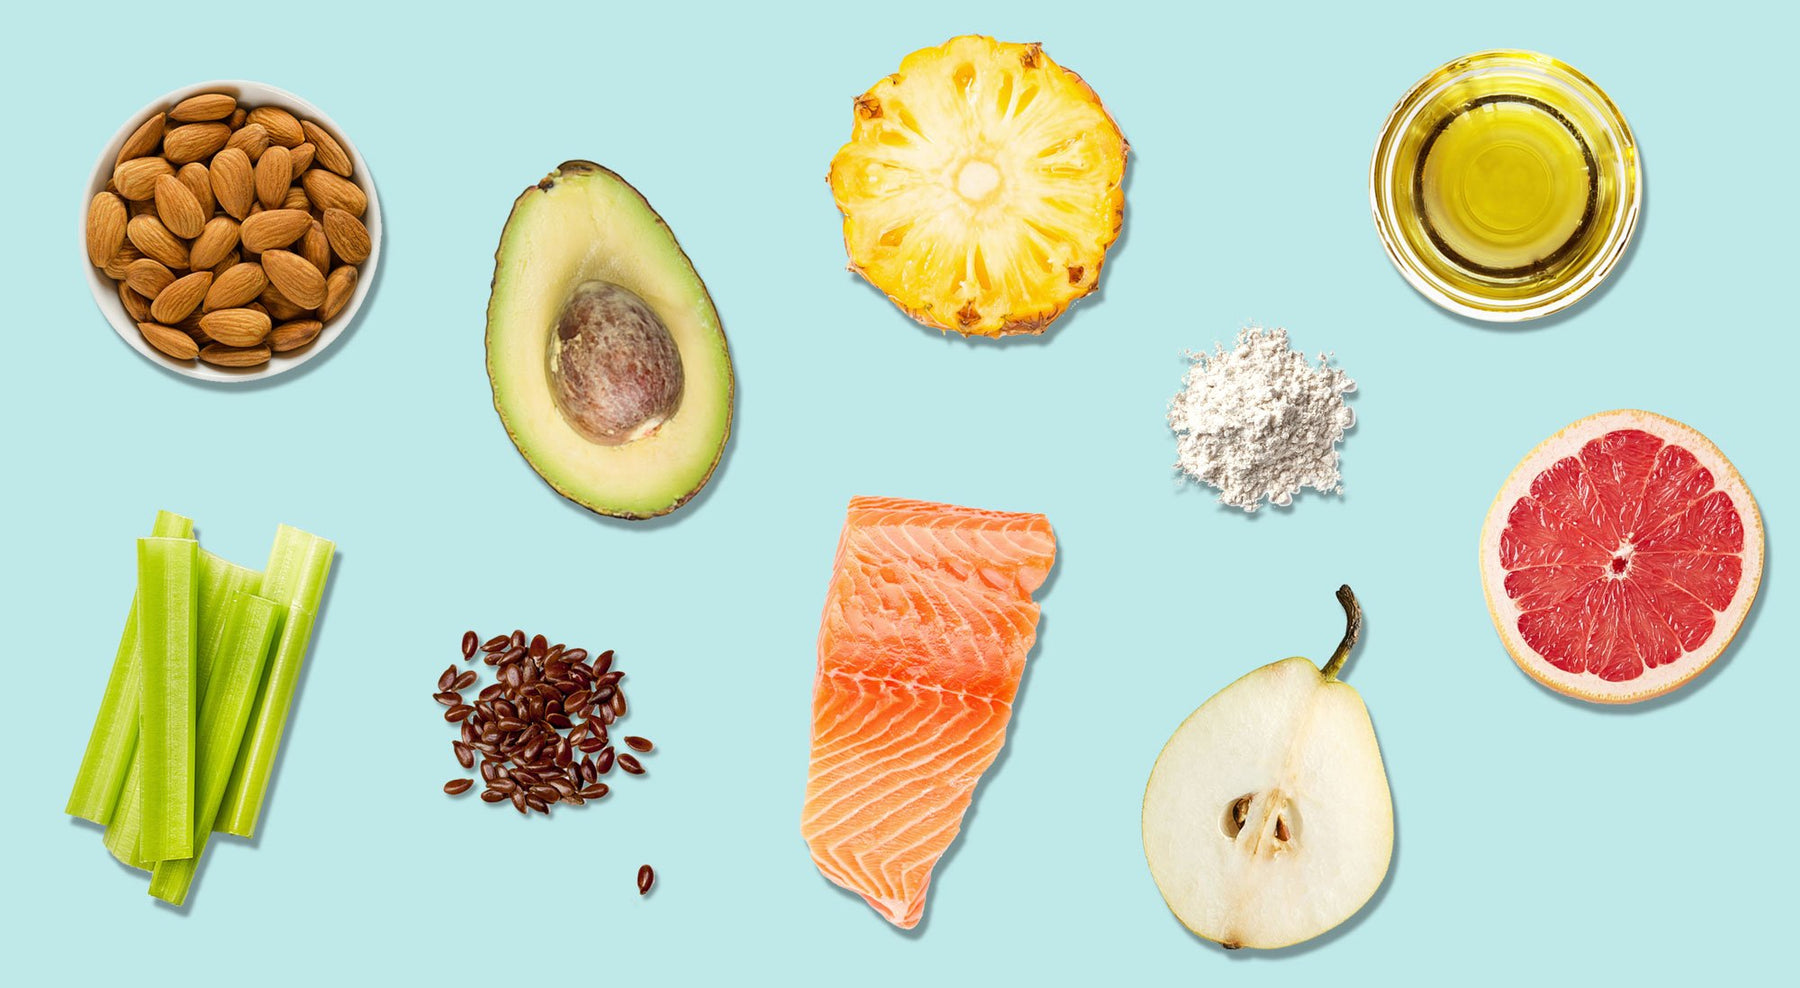 Top 10 Foods To Help Tone Your Body